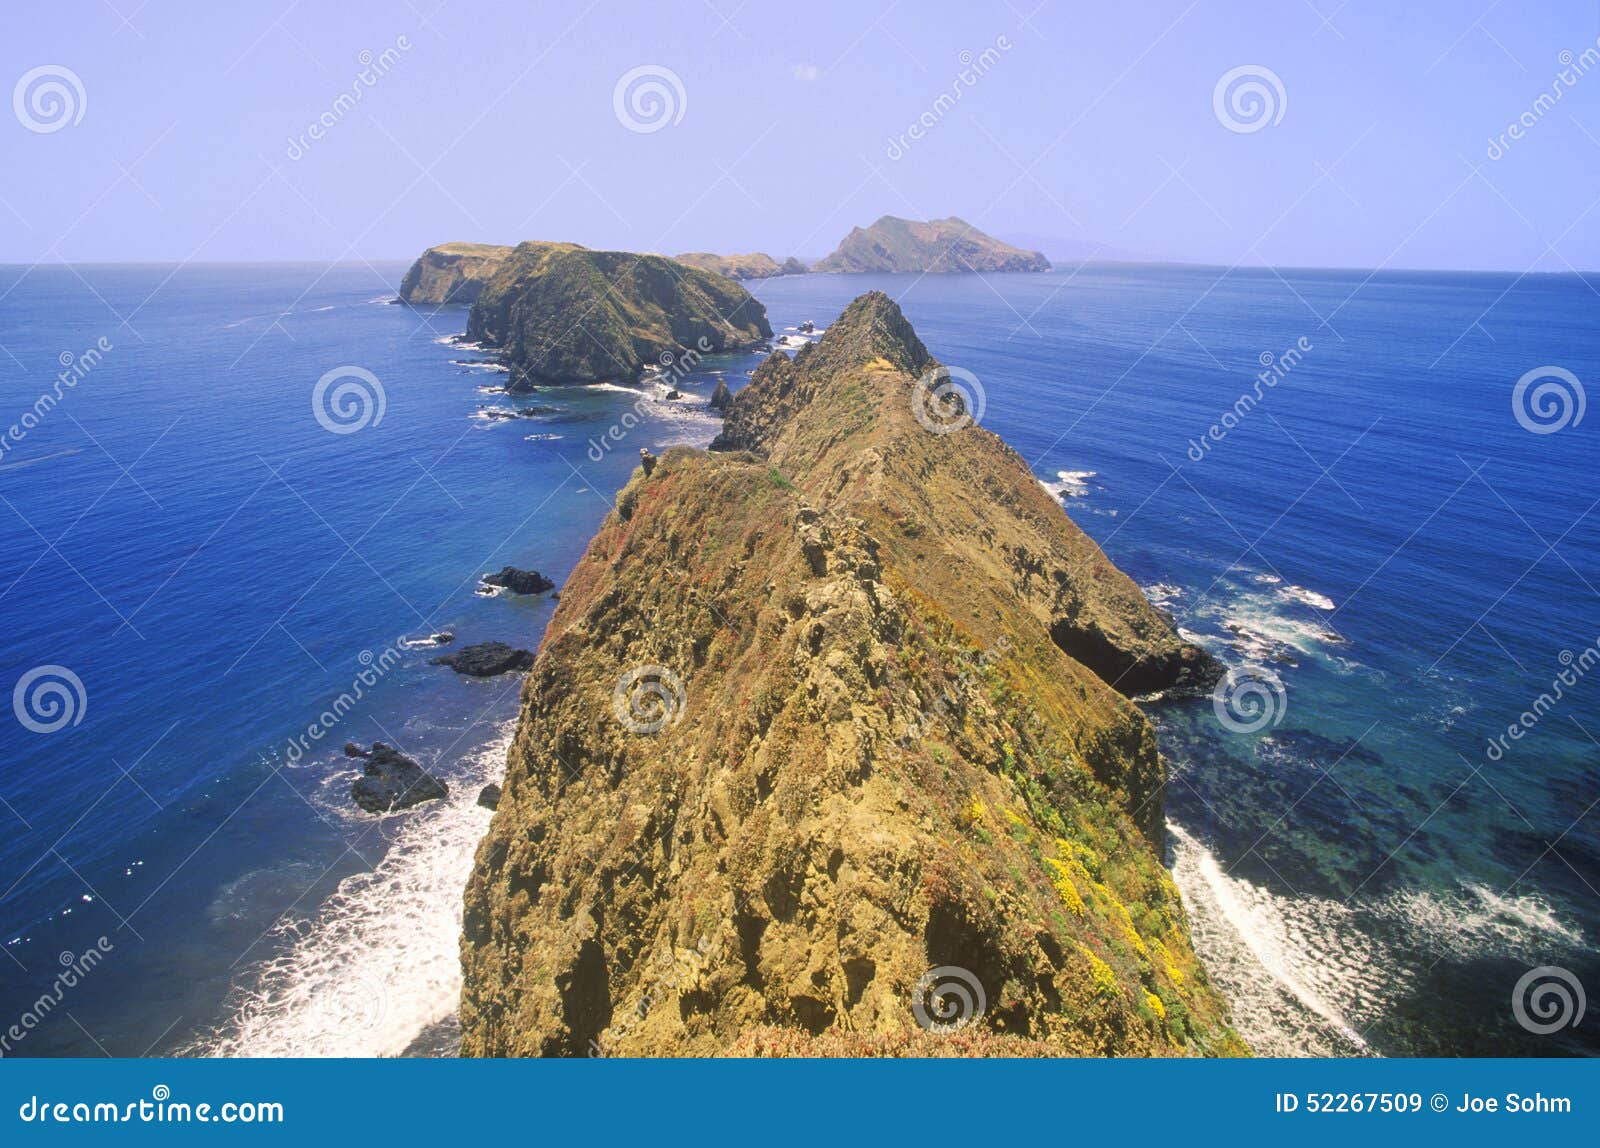 inspiration point on anacapa island, channel islands national park, california